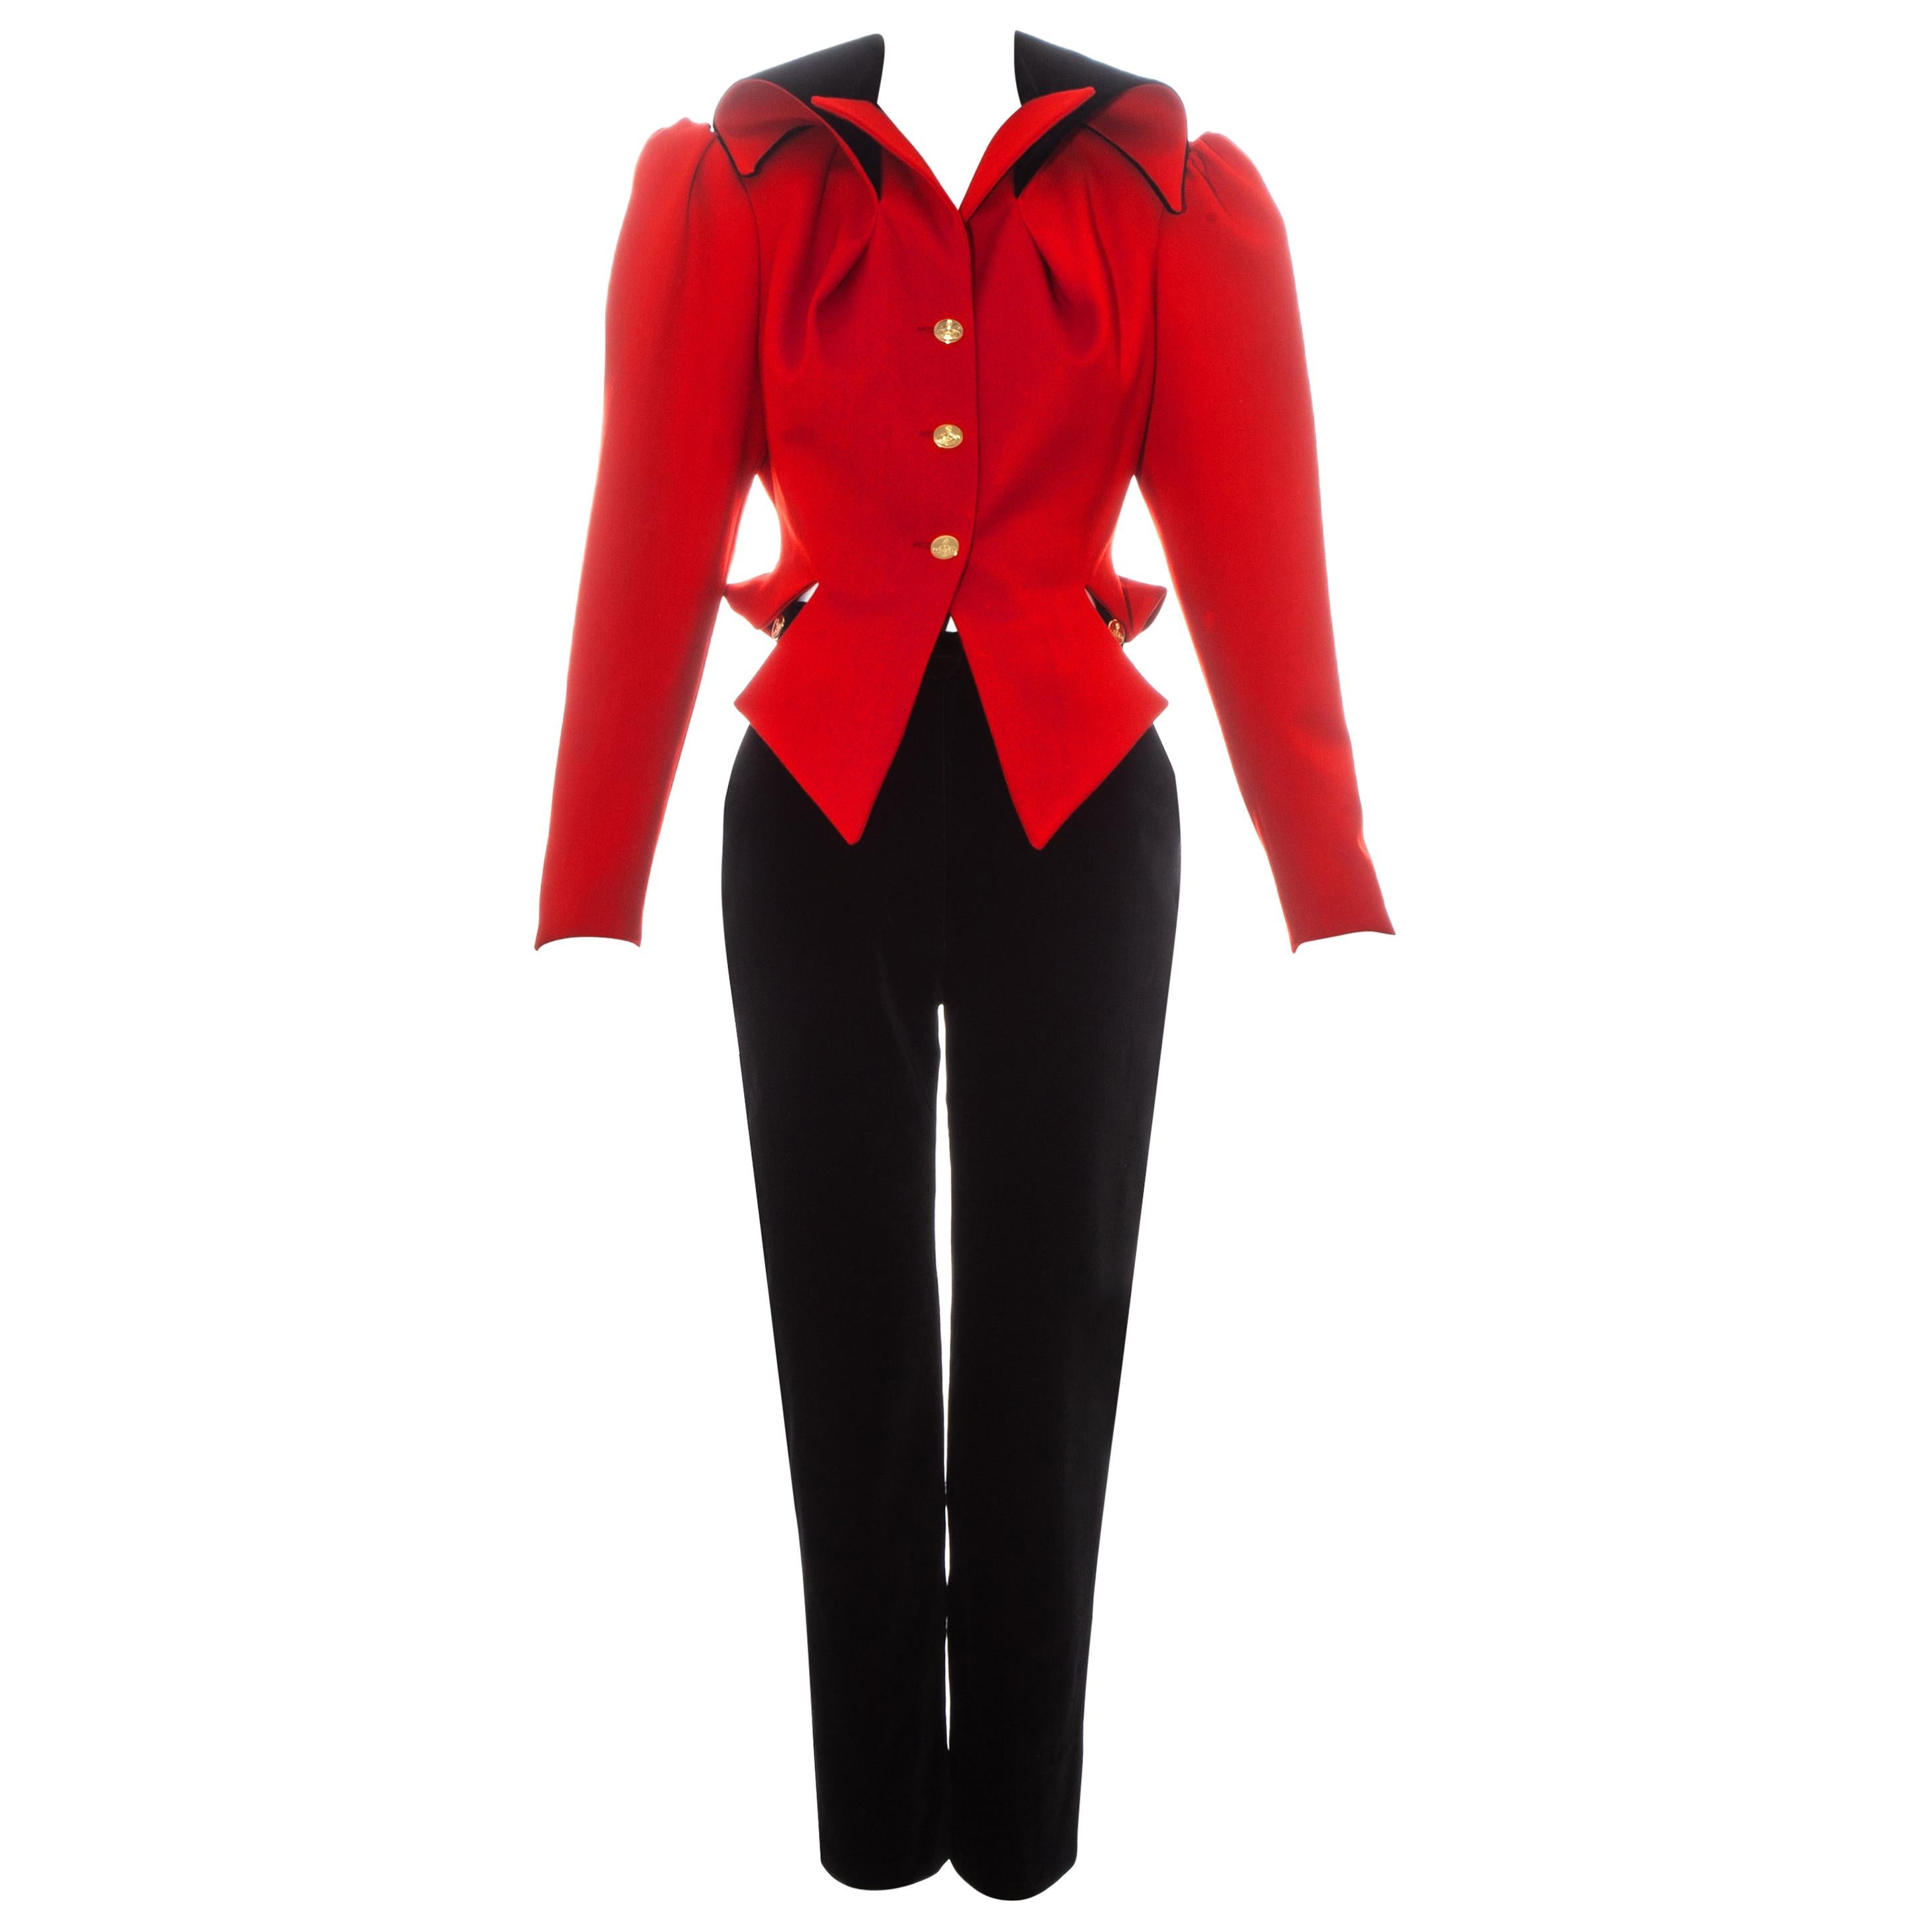 Vivienne Westwood red and black equestrian style pant suit, fw 1994